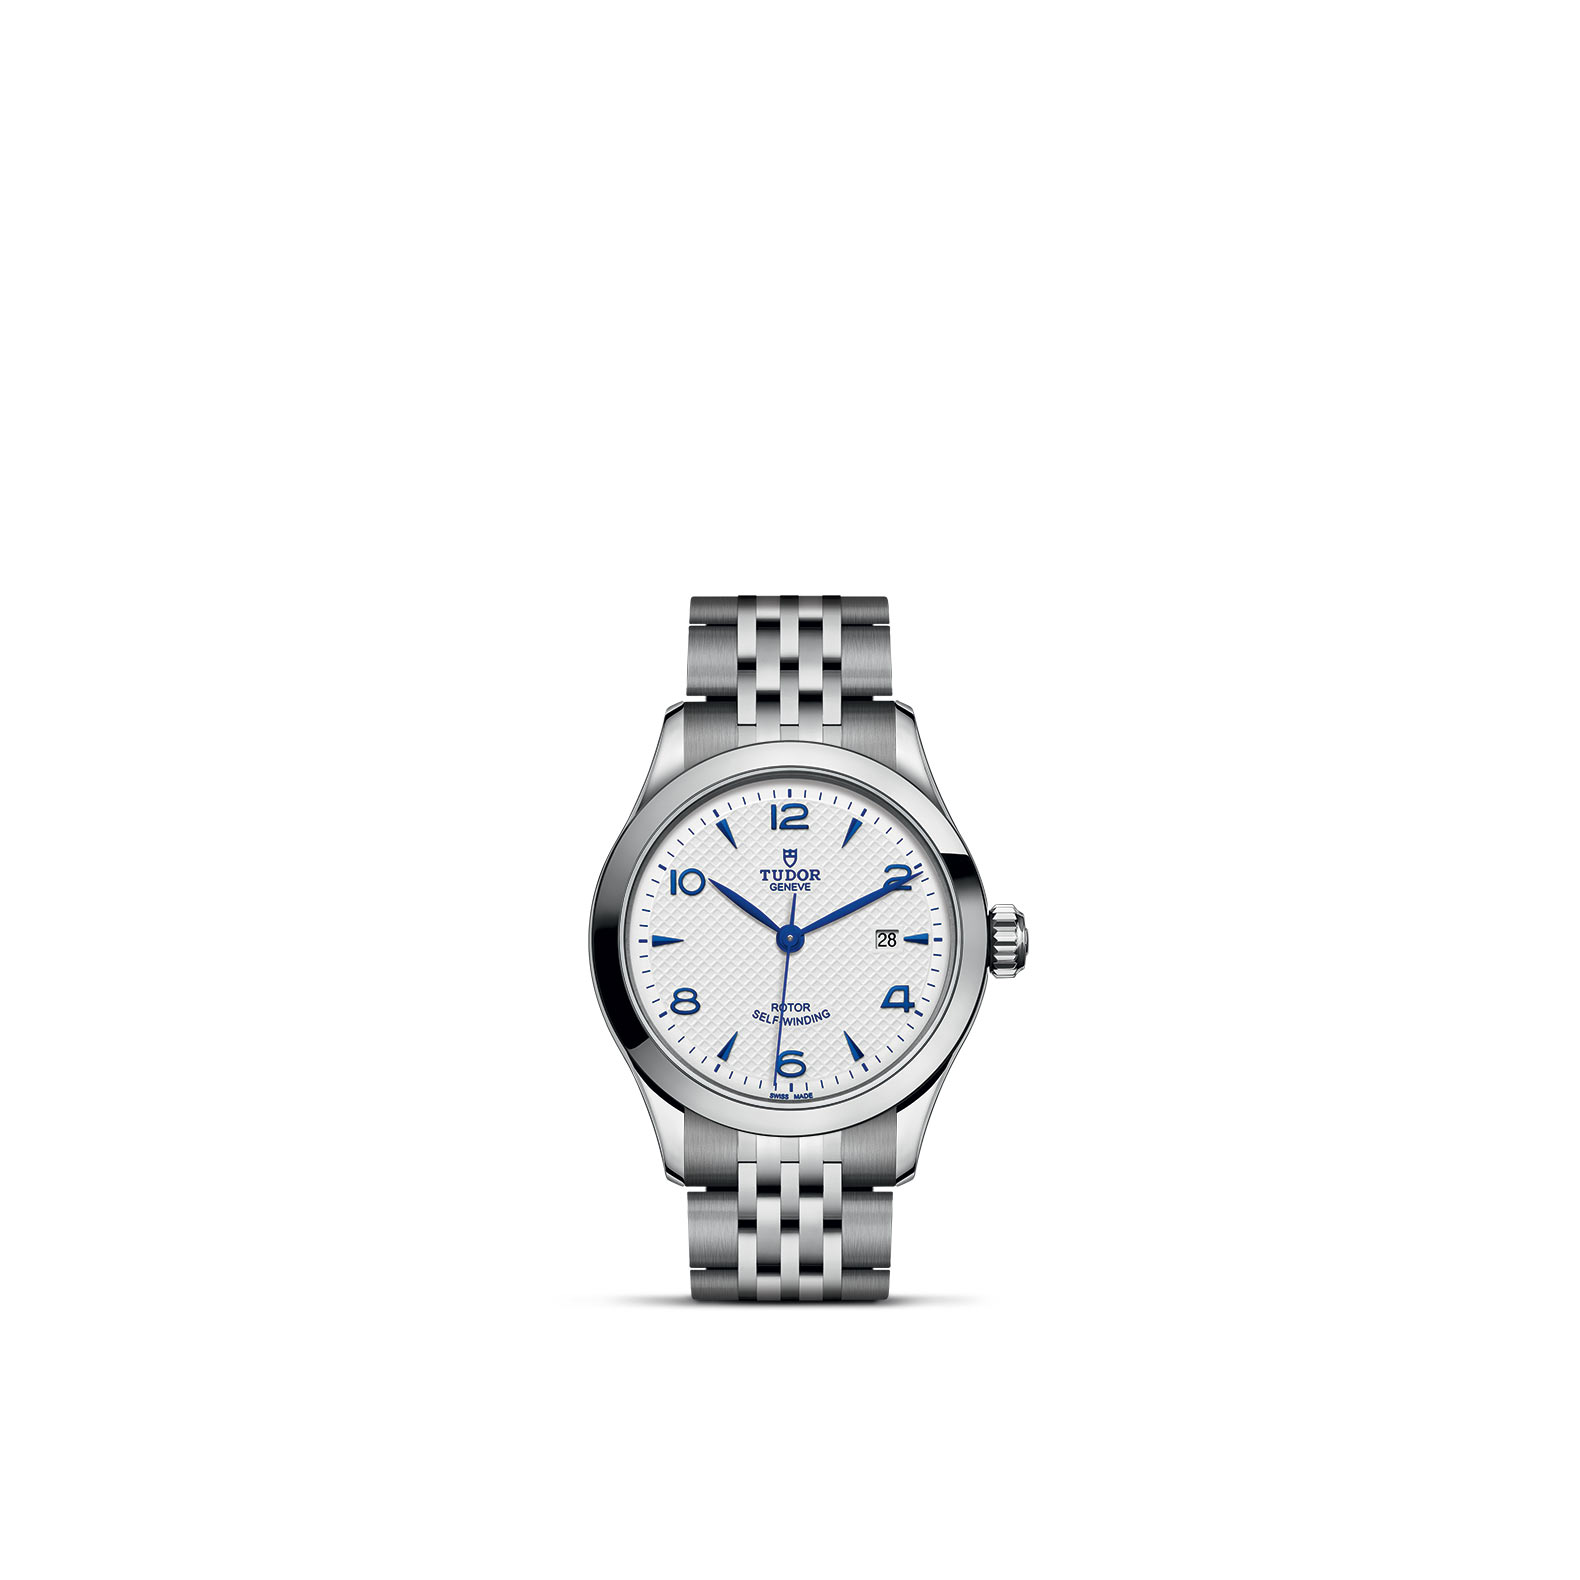 TUDOR 1926 standing upright, highlighting its classic design against a white background.